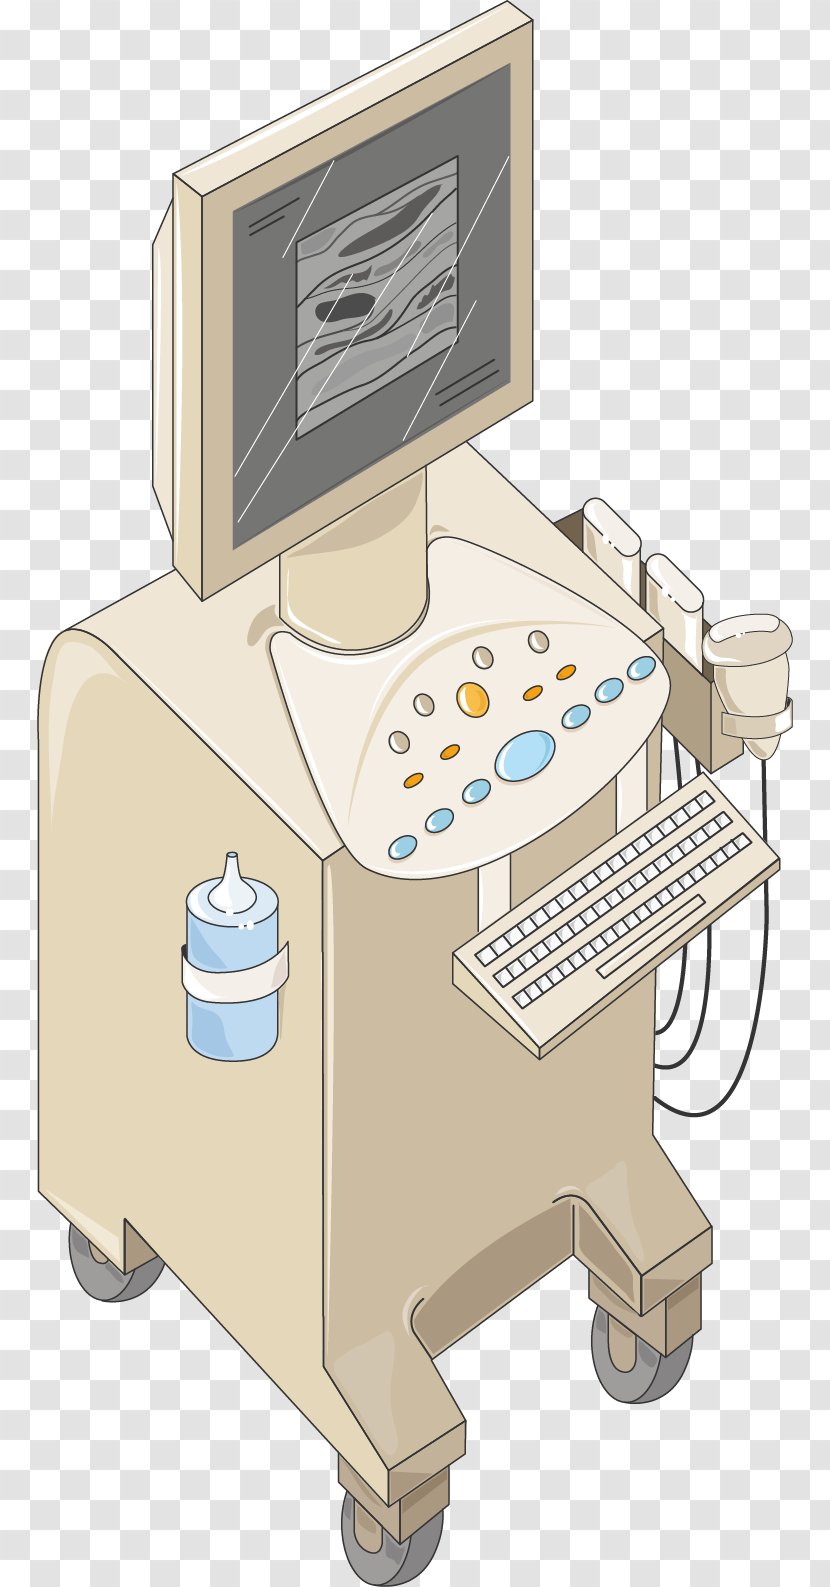 Medical Equipment Ultrasonography Electrocardiography Imaging Diagnosis - Echinococcosis - Bunsen Burner Day Transparent PNG